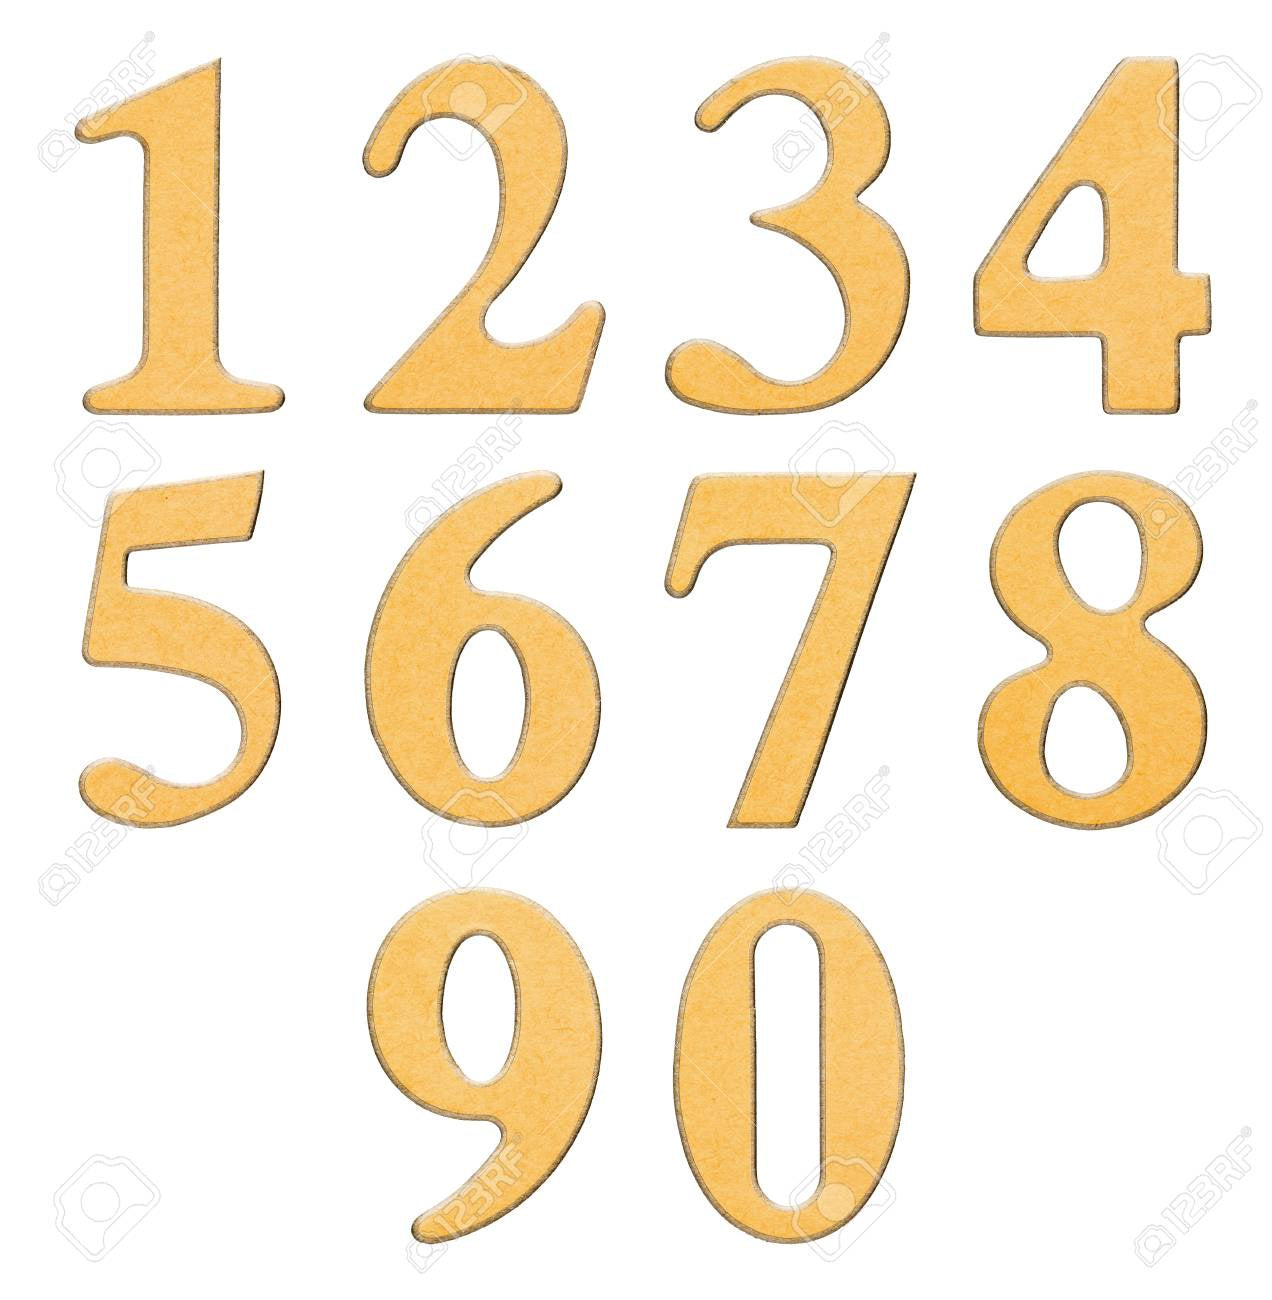 Yellow  Number - Cardboard Number 0